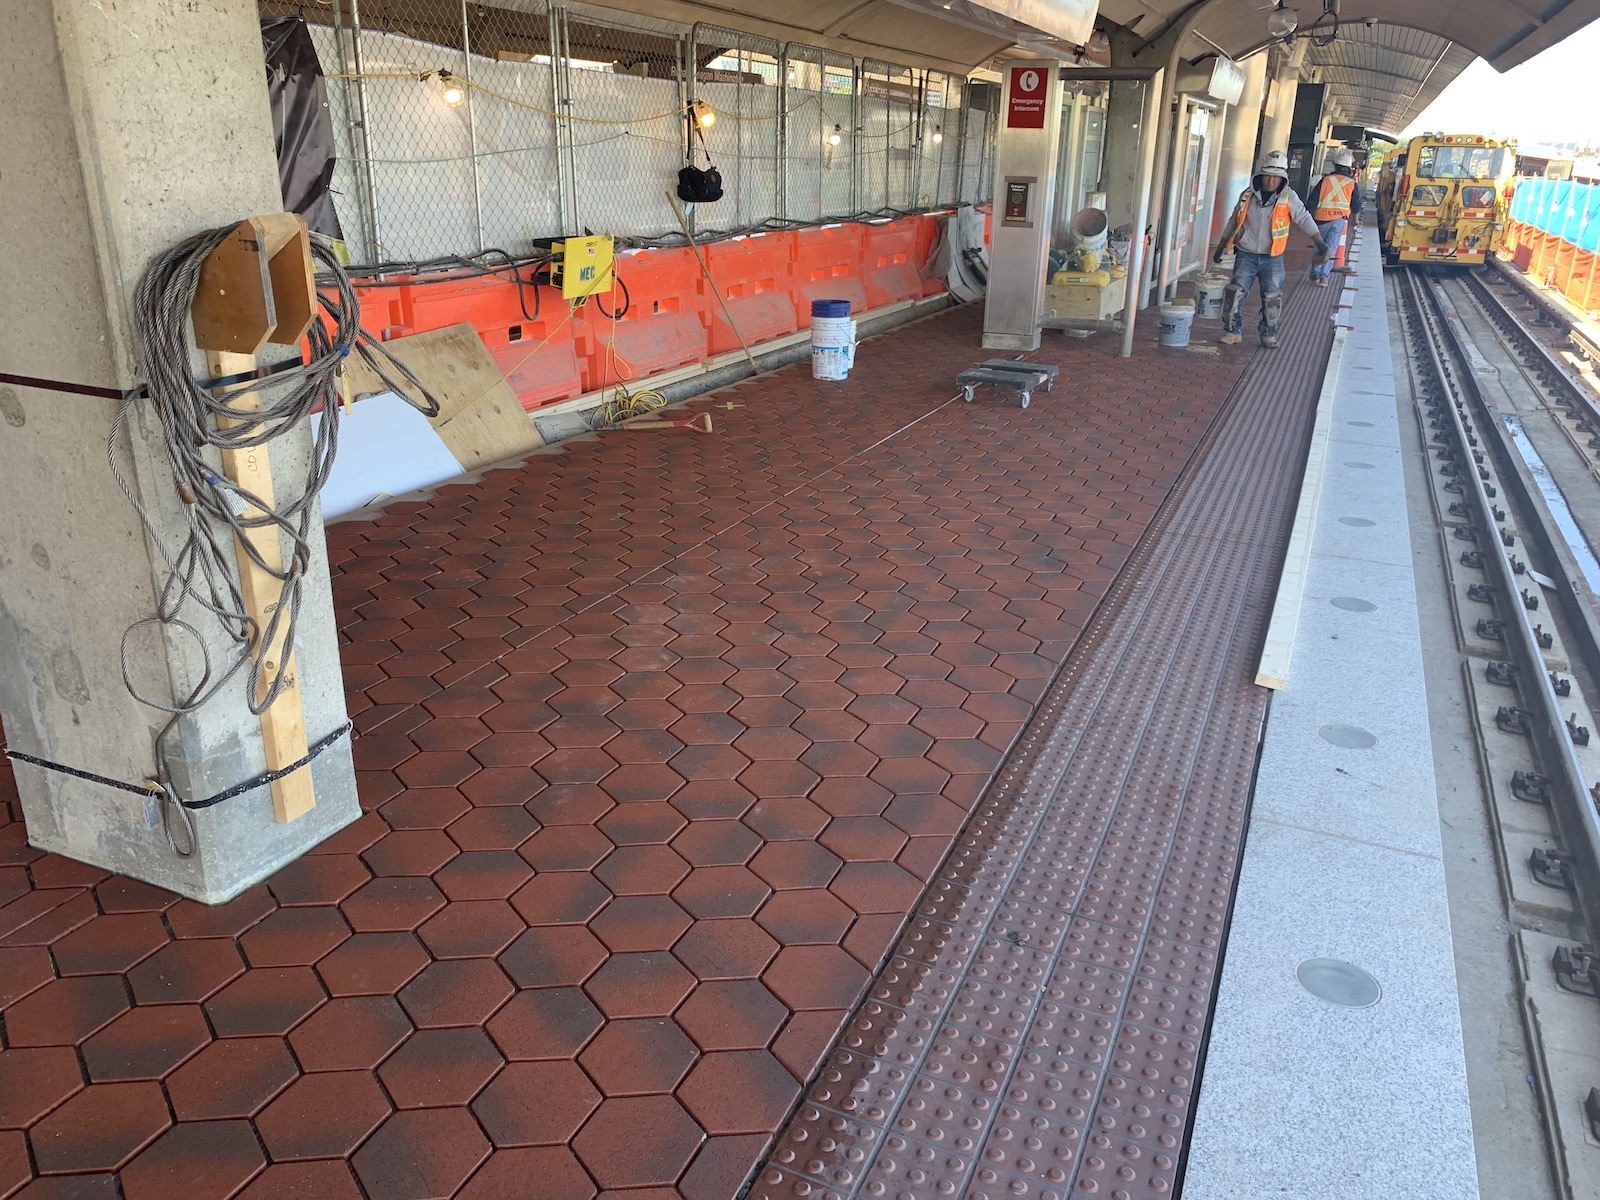 Tile installation and grouting at Reagan National Airport